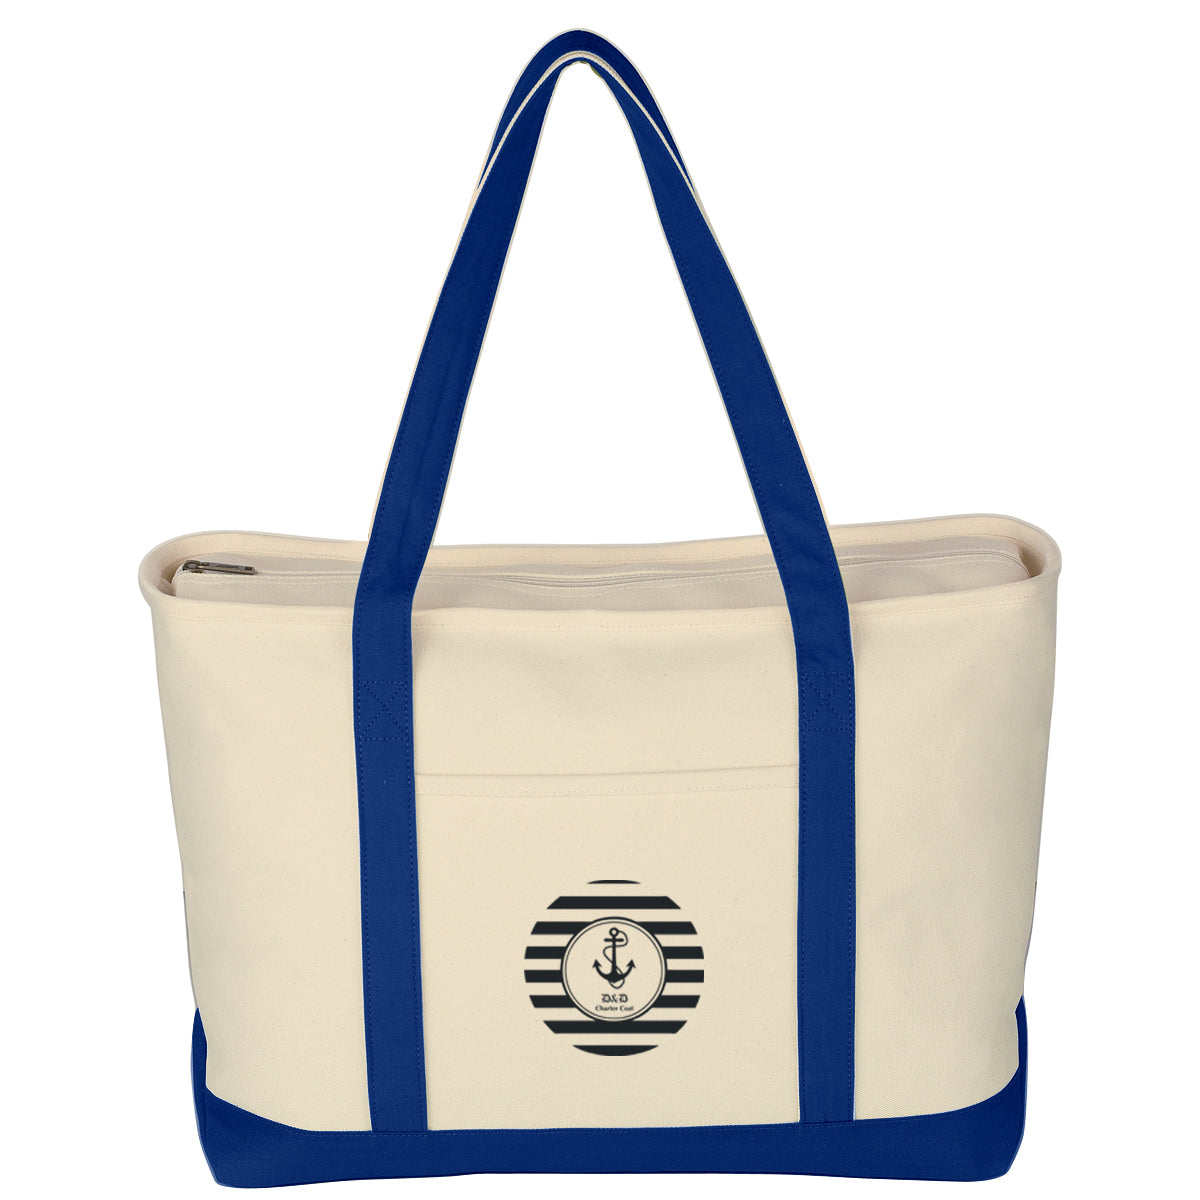 heavy canvas totes royal blue with imprint